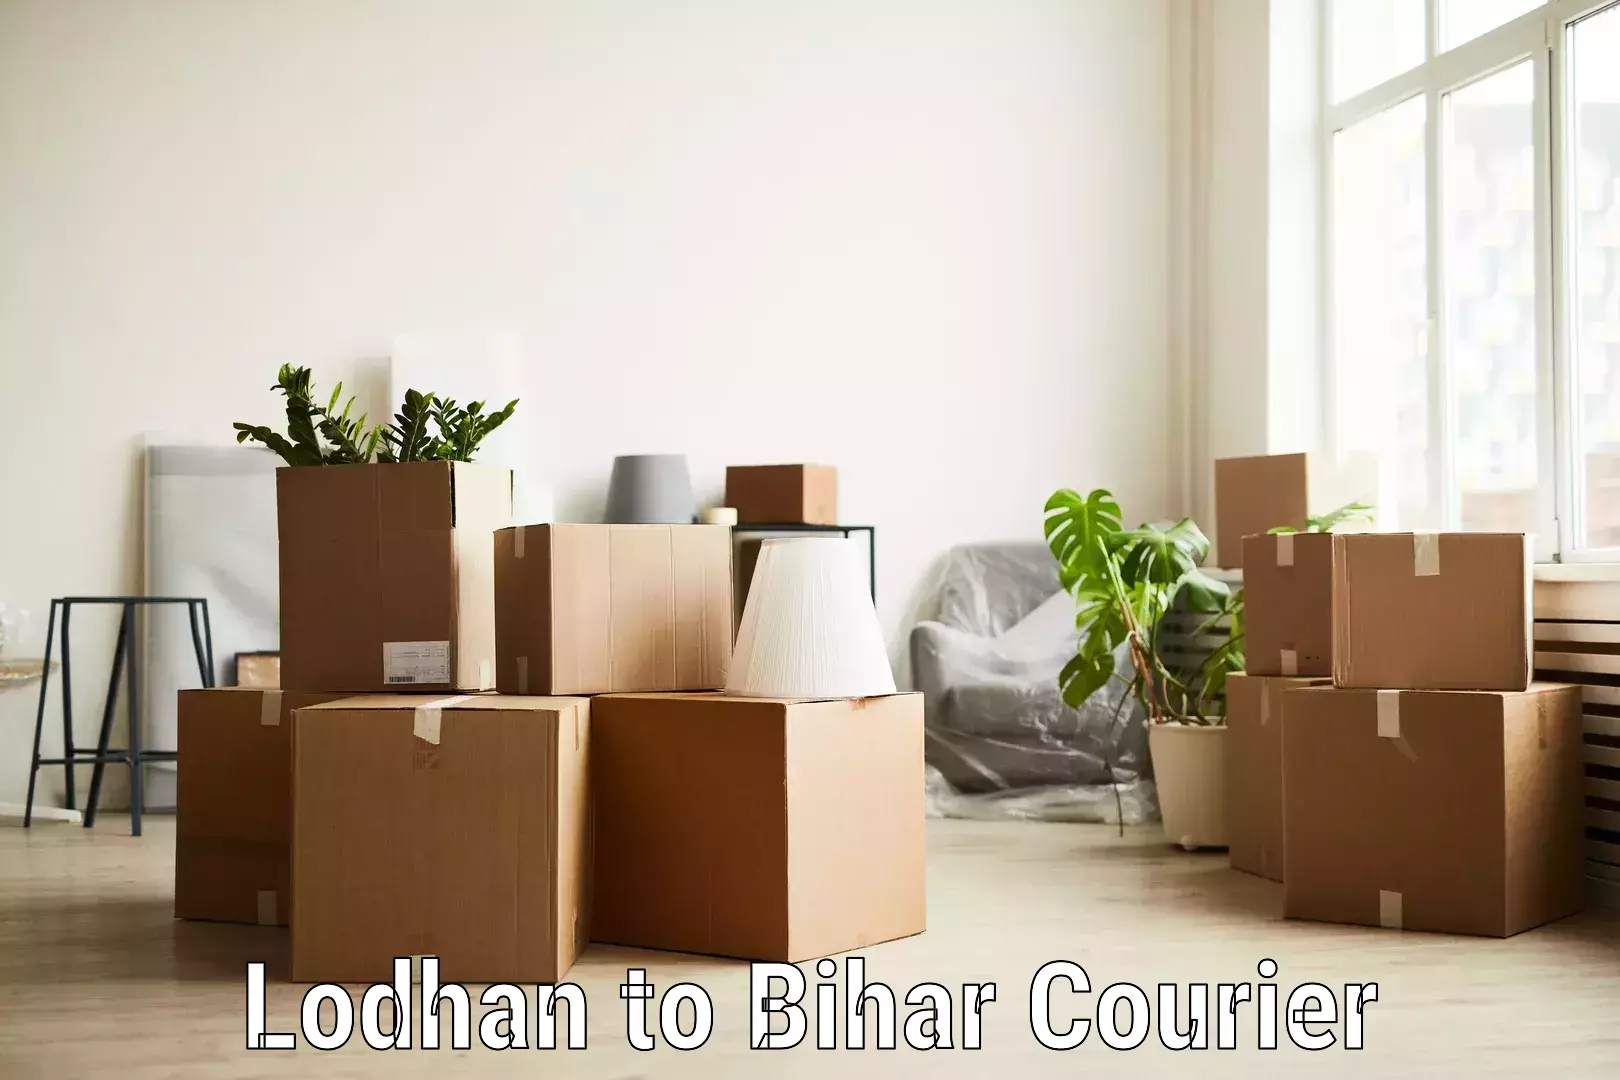 Business delivery service Lodhan to Bihar